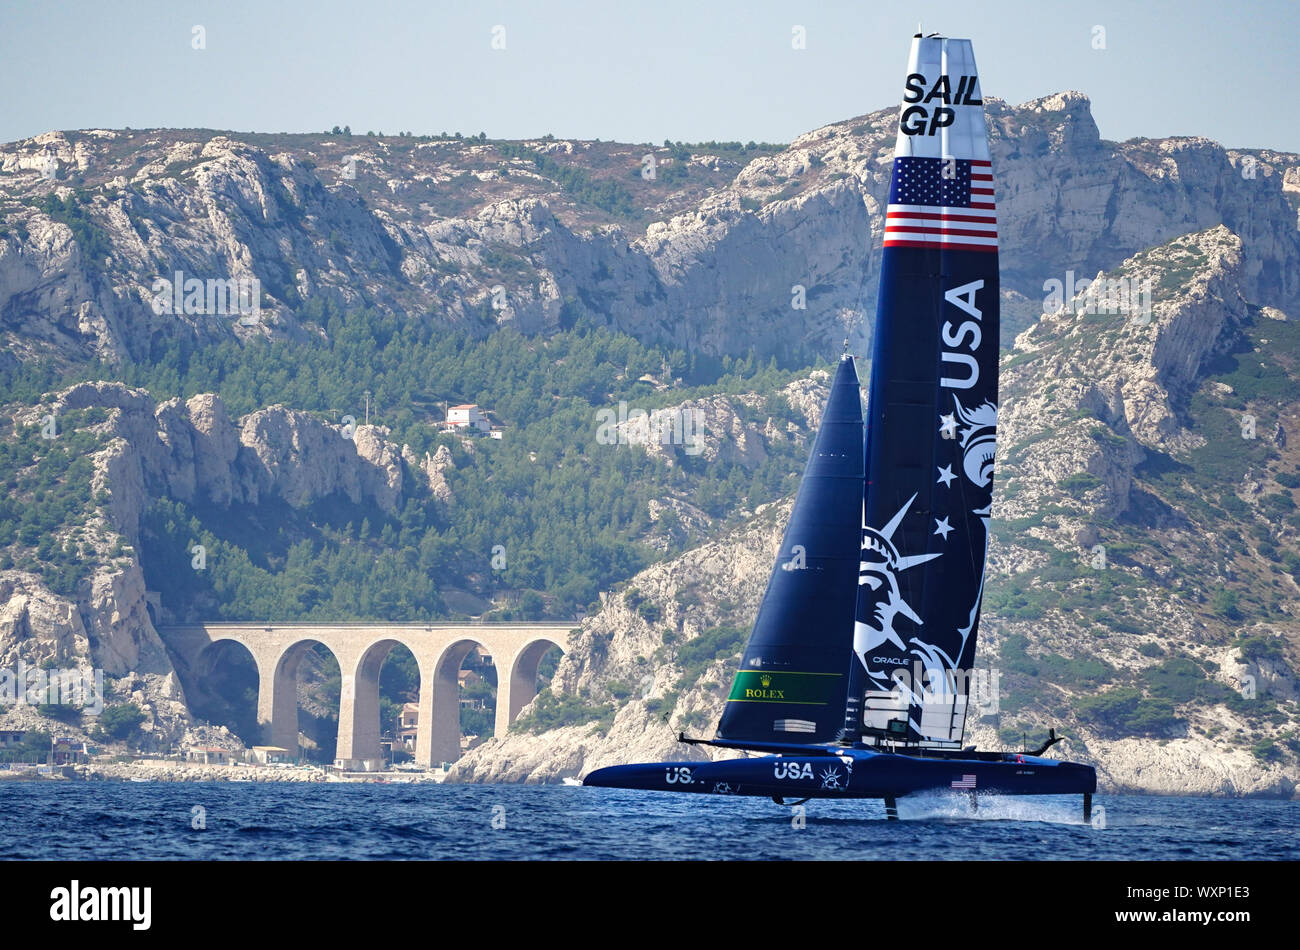 USA SailGP Team helmed by Rome Kirby in action on the Rade de Marseille as they practise for the final SailGP event of Season 1 in Marseille. Stock Photo